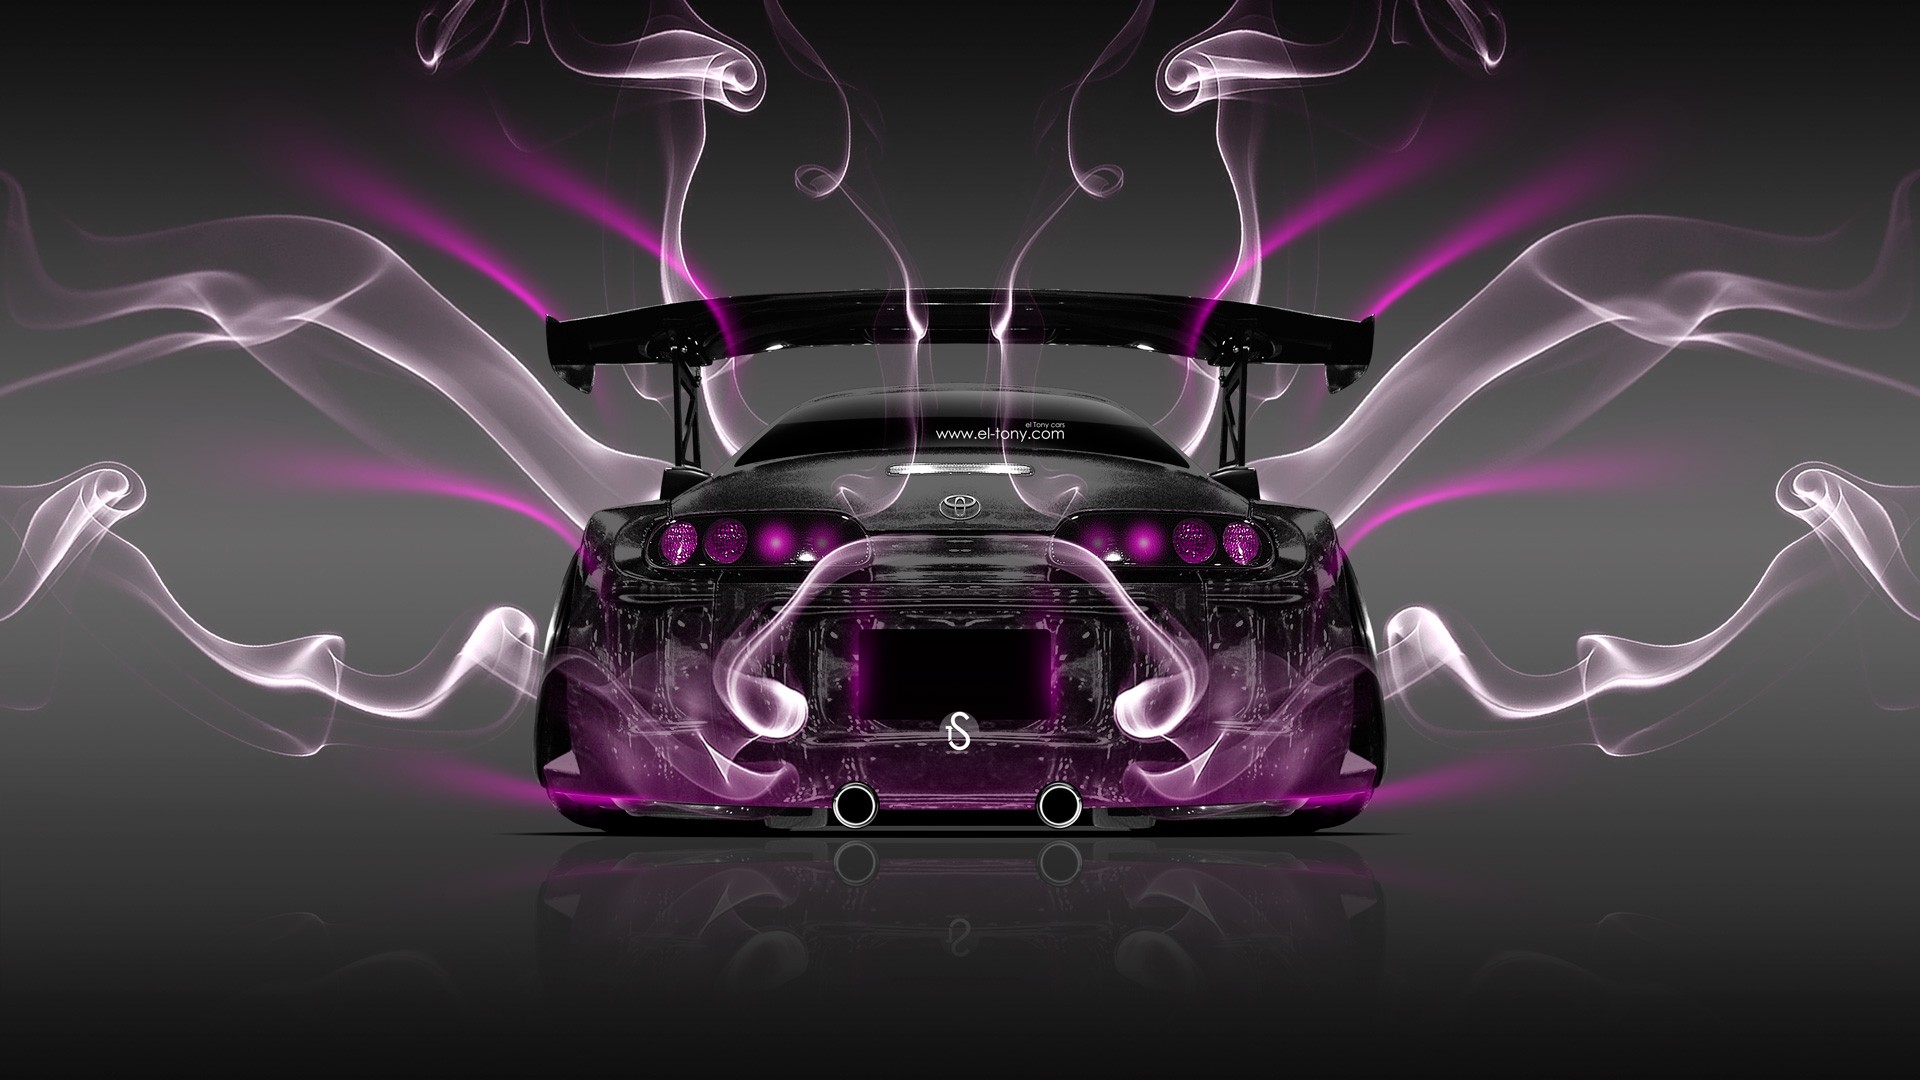 Free photo Toyota Supra in a rendering of the rear view image